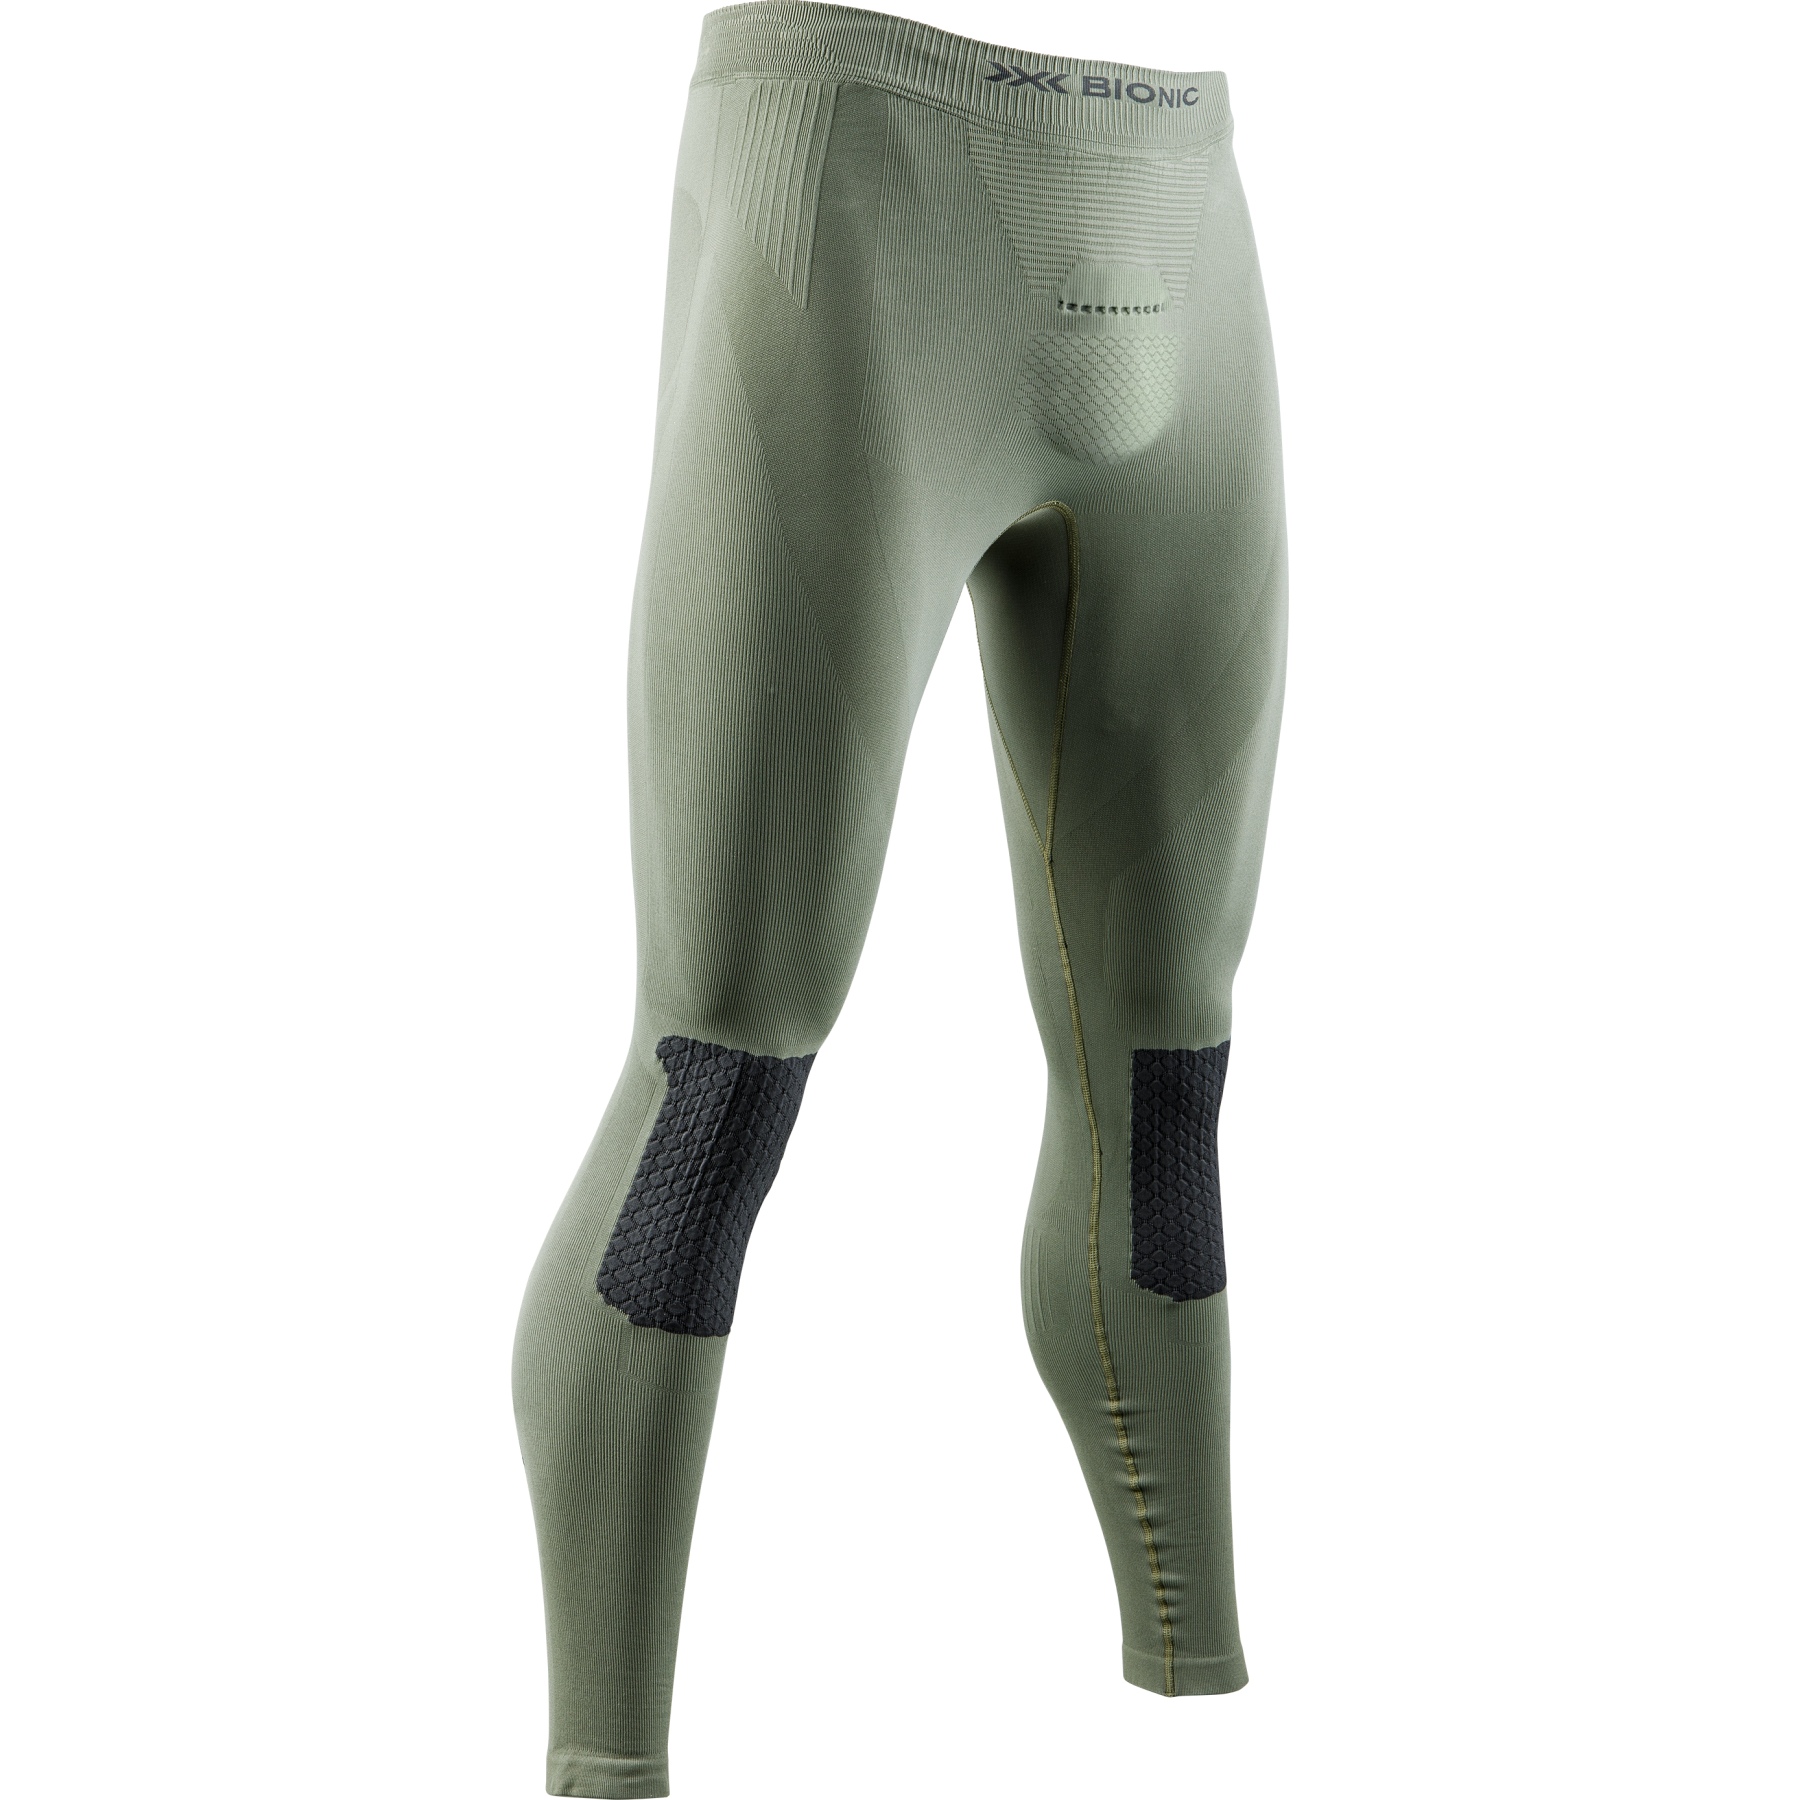 Picture of X-Bionic X-Plorer Energizer 4.0 Baselayer Pants Men - olive green/anthracite